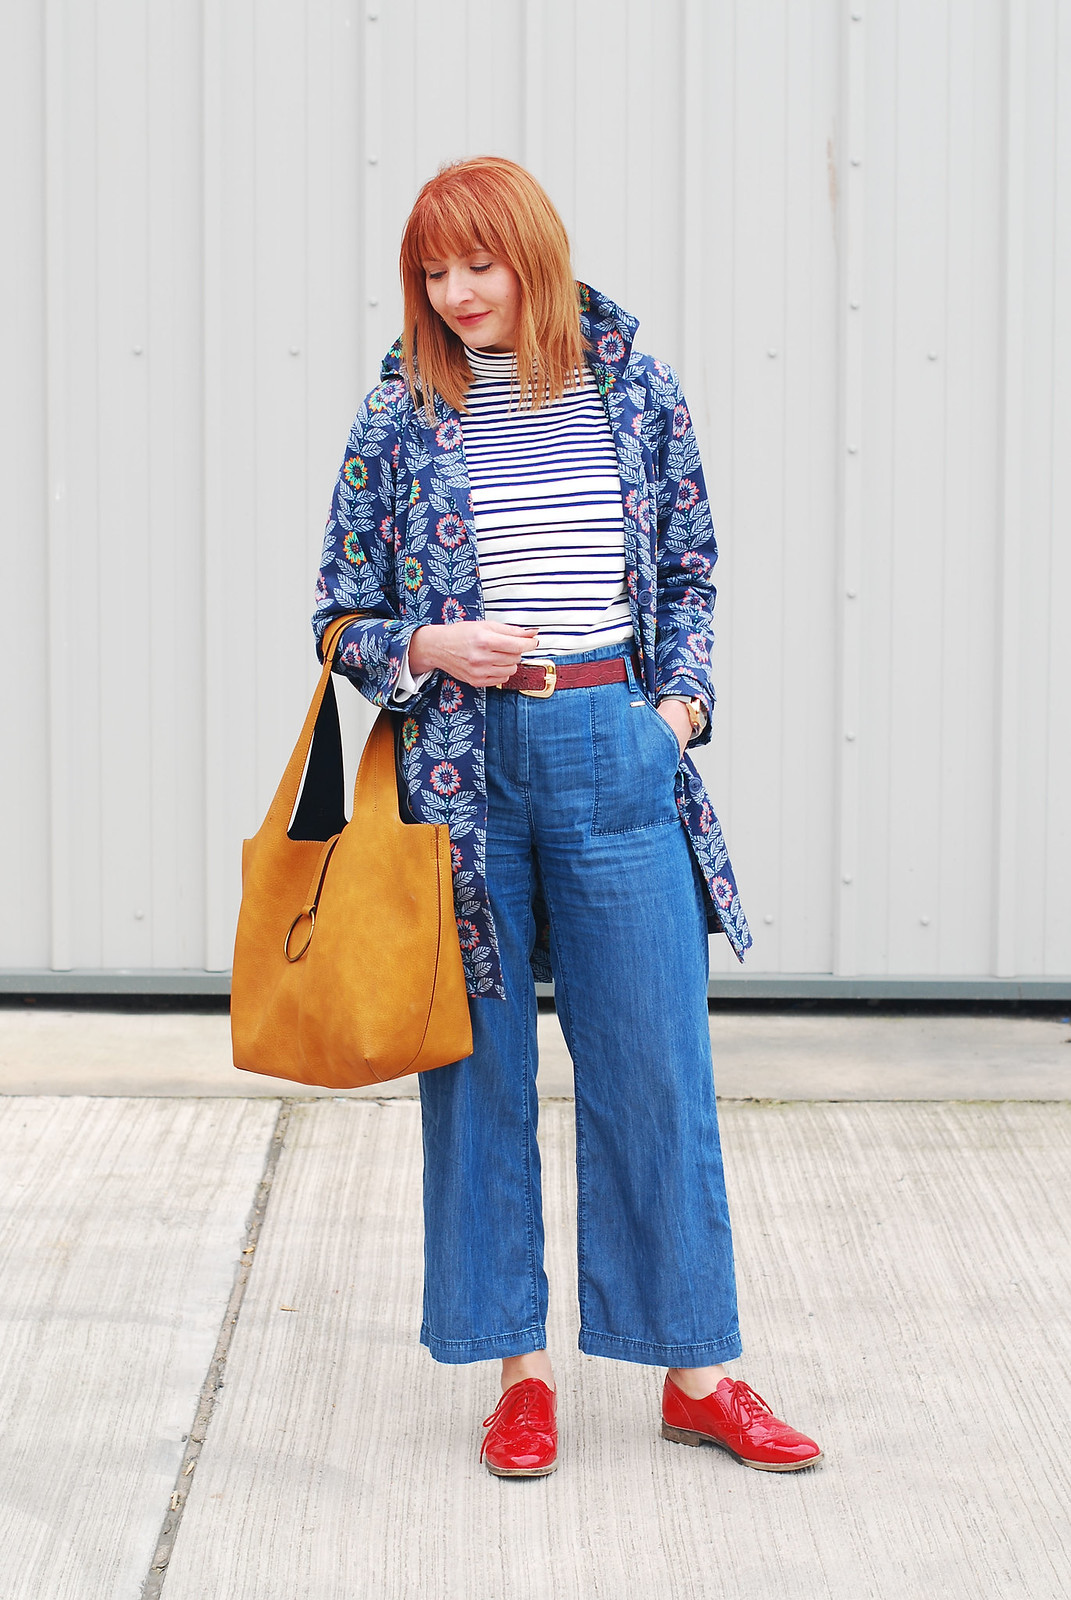 Bright spring weather outfit: Floral Seasalt raincoat high neck stripe Breton top wide leg cotton denim trousers red brogues ochre bucket bag | Not Dressed As Lamb, over 40 style